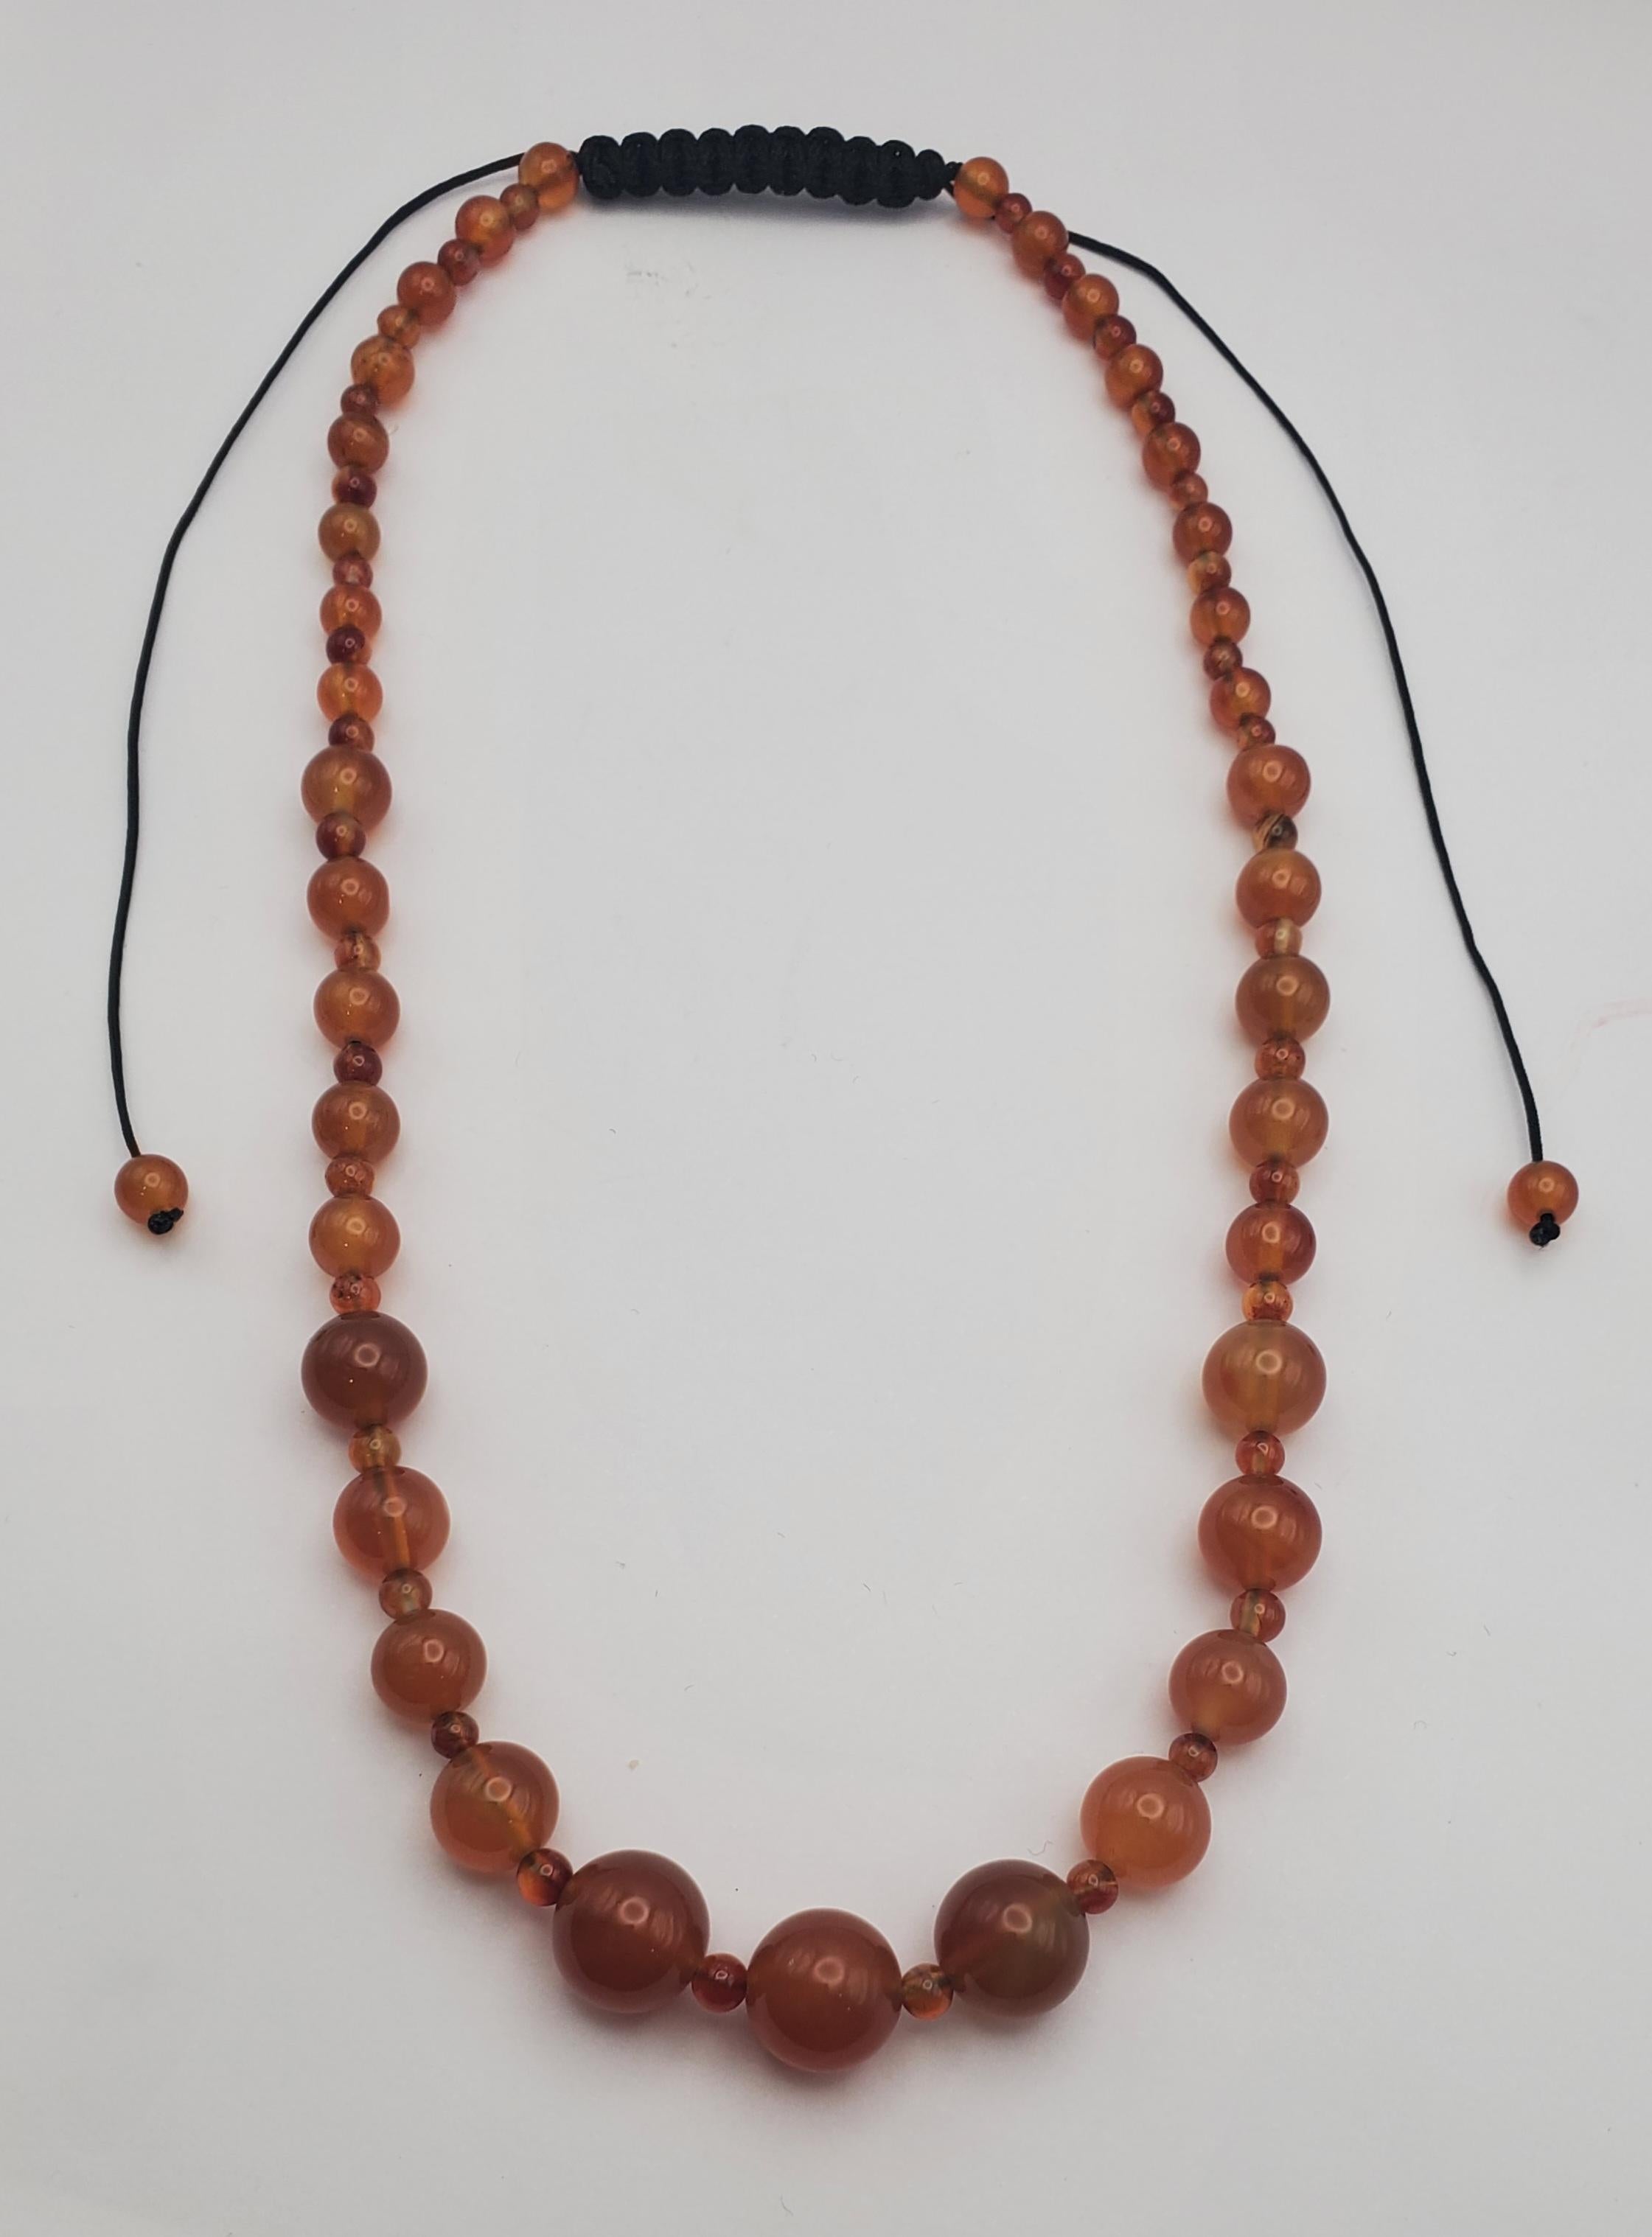 Gorgeous Vintage Adjustable Natural Carnelian Round Bead Necklace For Sale 5